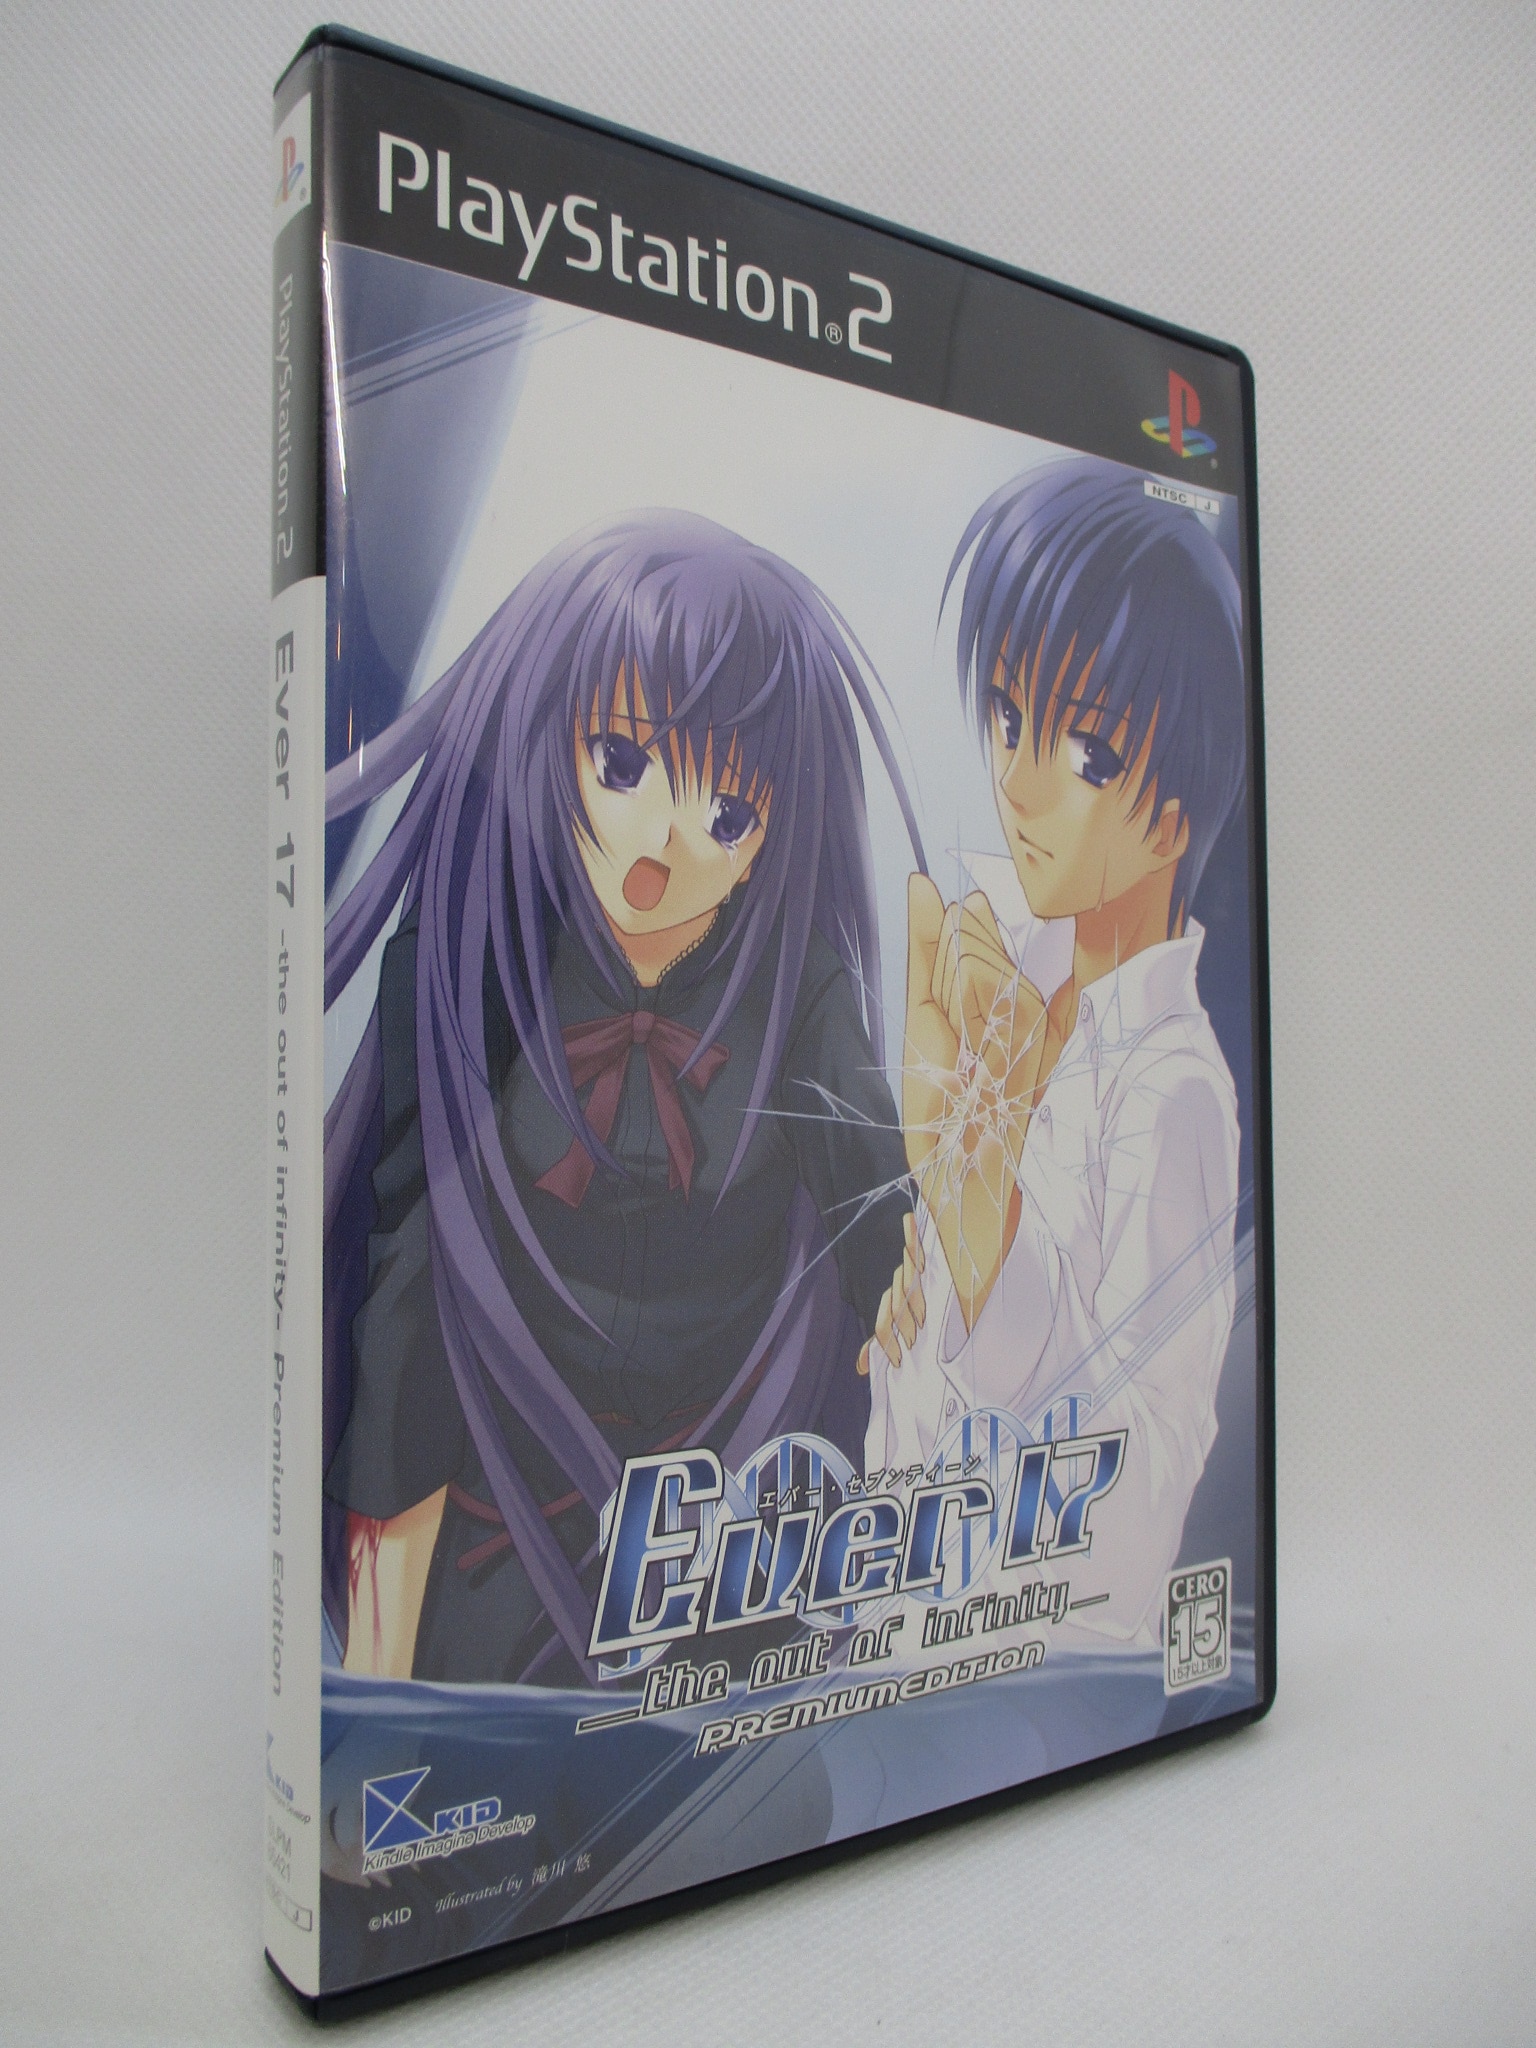 PS2 Ever17 -the out of infinity- Premium Edition | MANDARAKE 在线商店